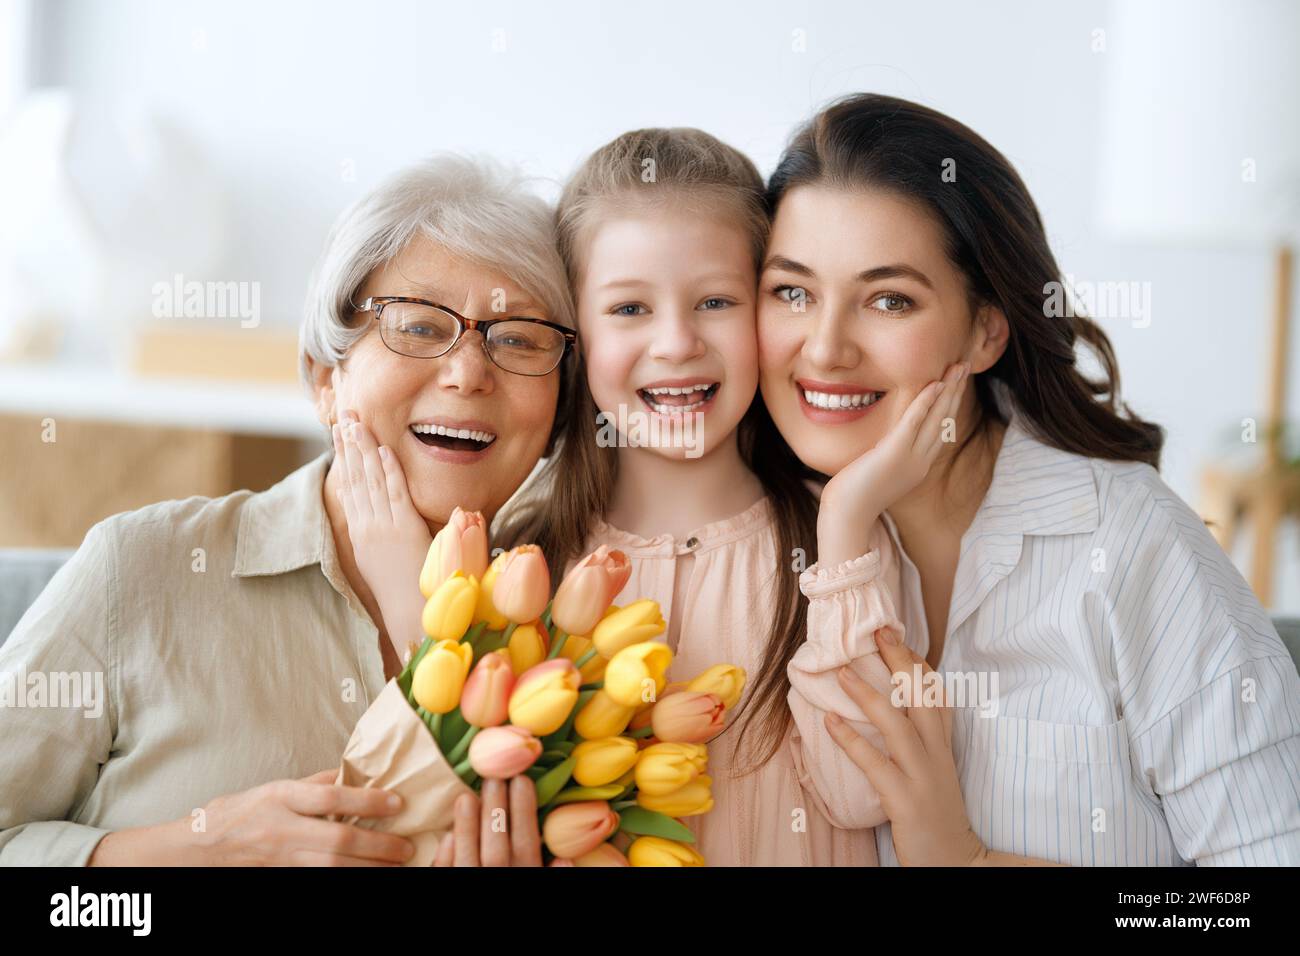 Happy mother's day. Child daughter and mother are congratulating granny giving her flowers tulips. Grandma, mum and girl smiling and hugging. Family h Stock Photo